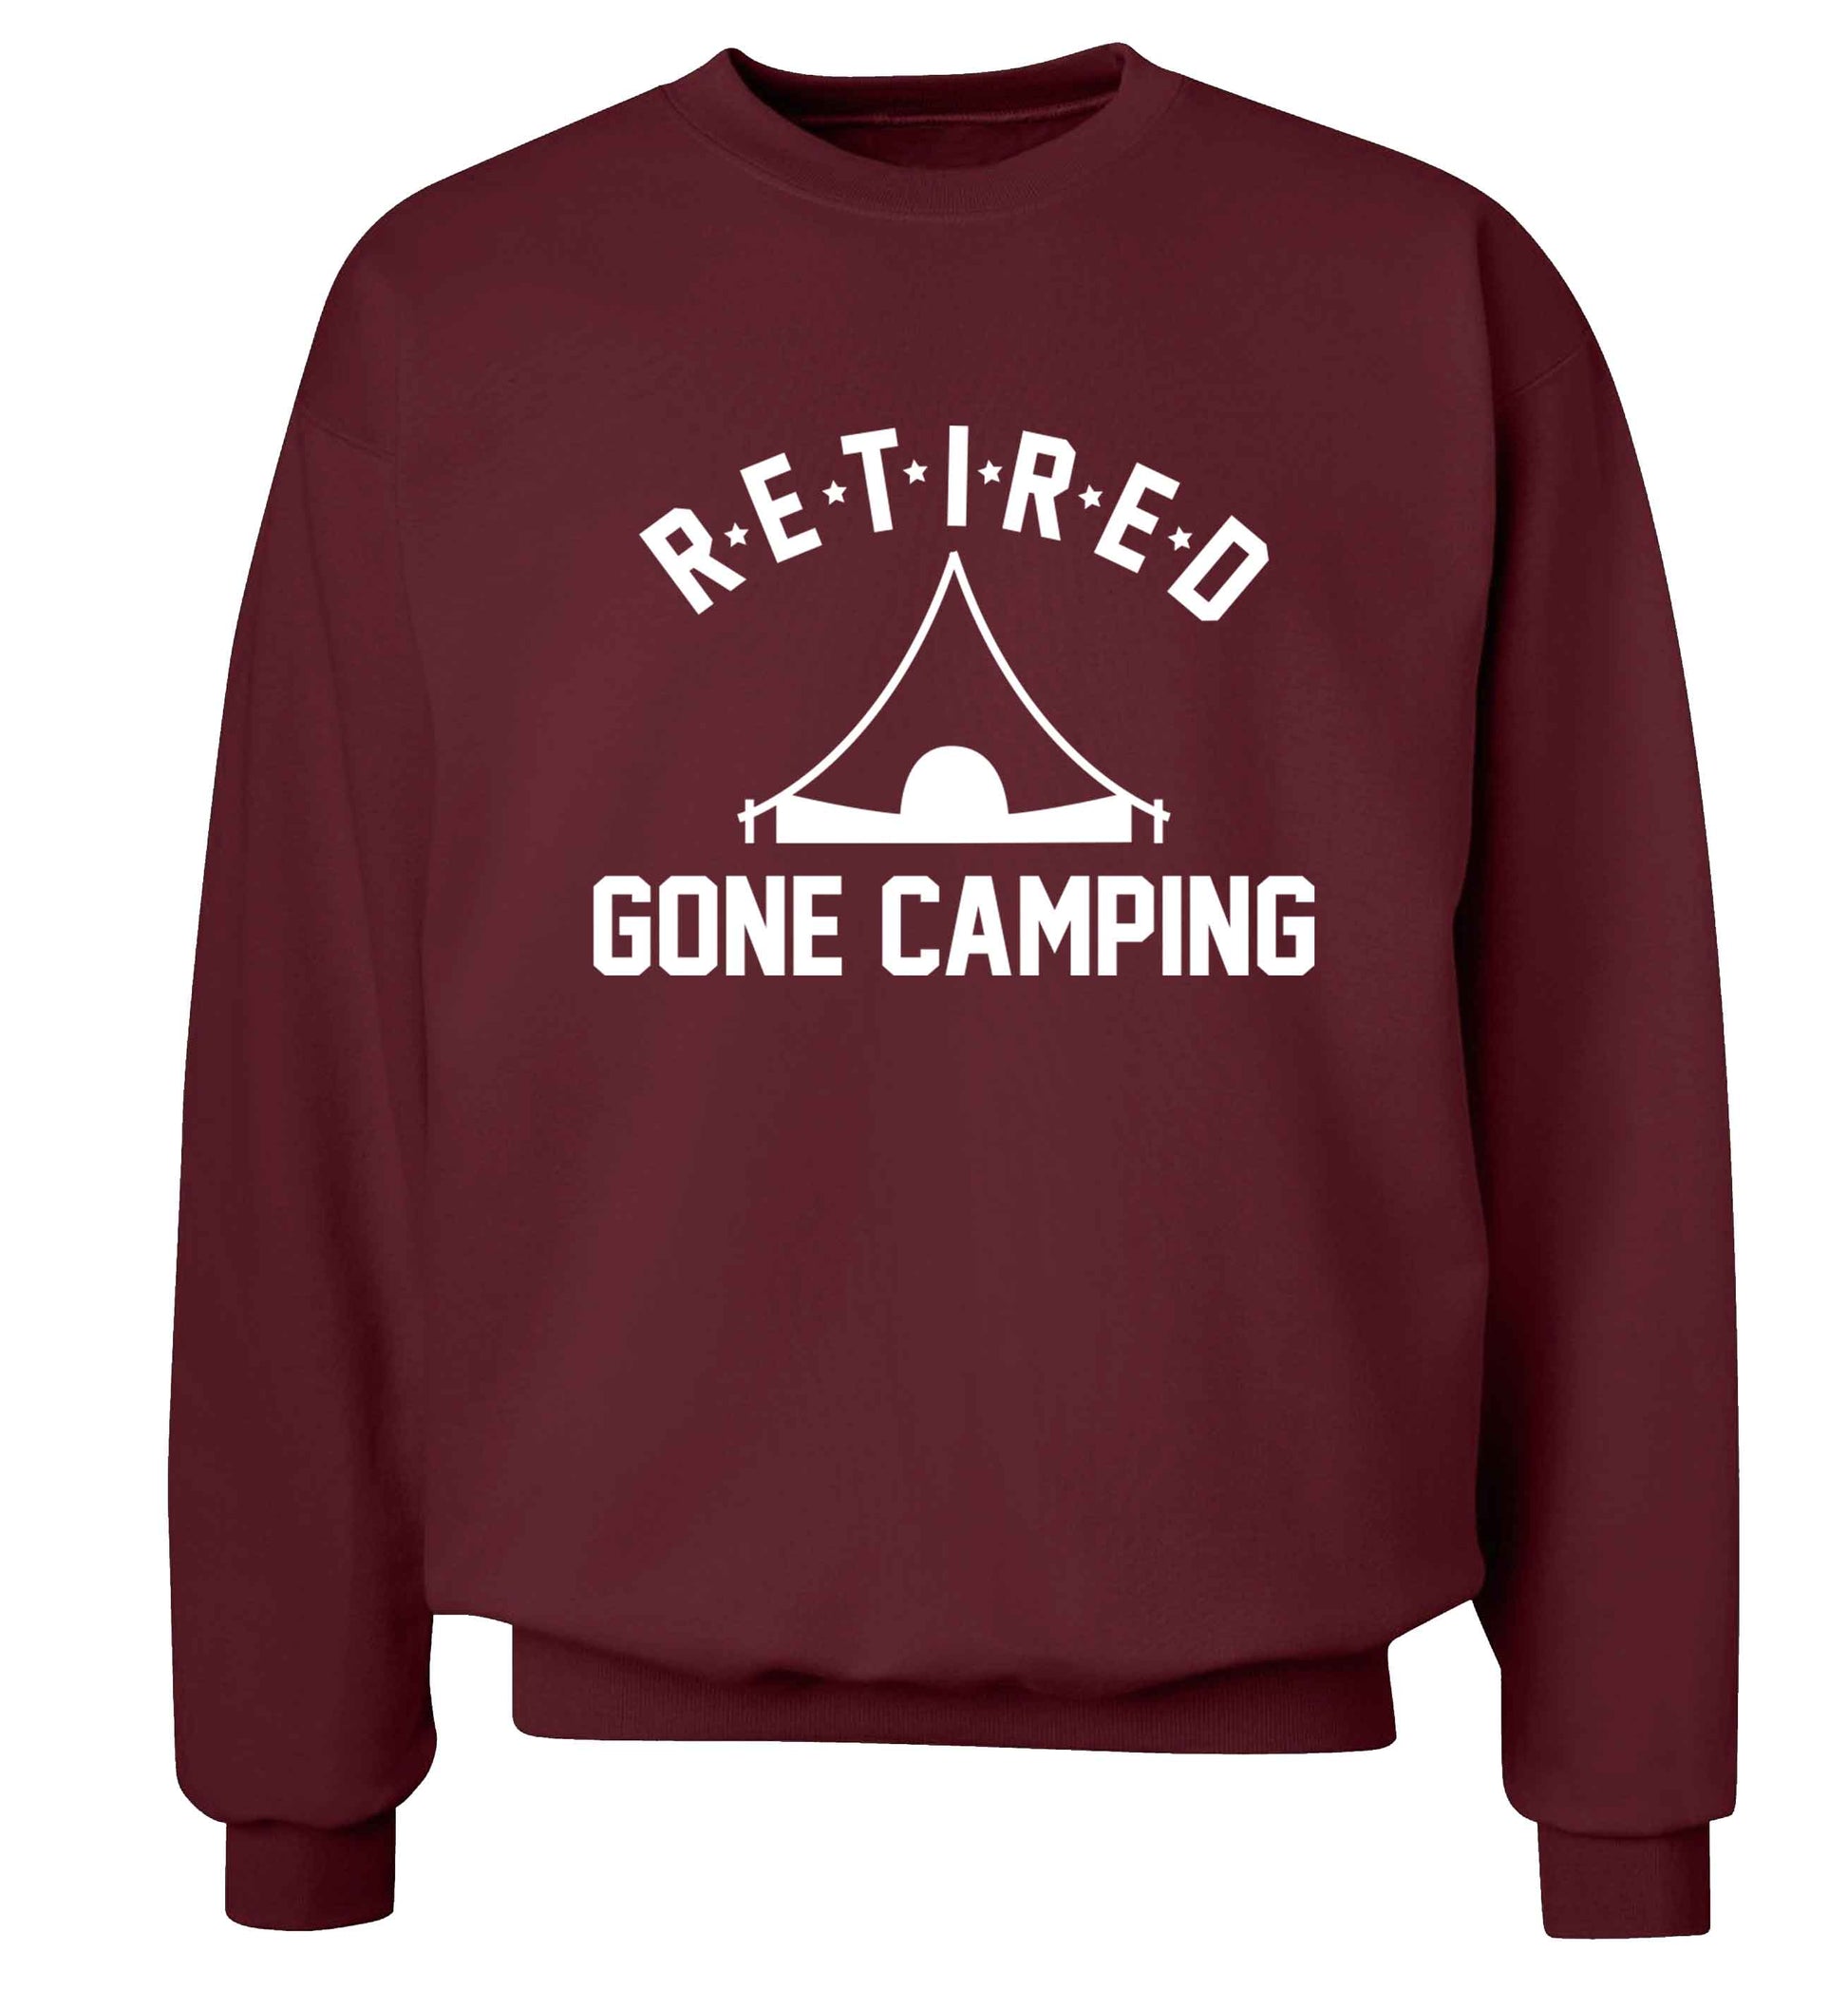 Retired gone camping Adult's unisex maroon Sweater 2XL